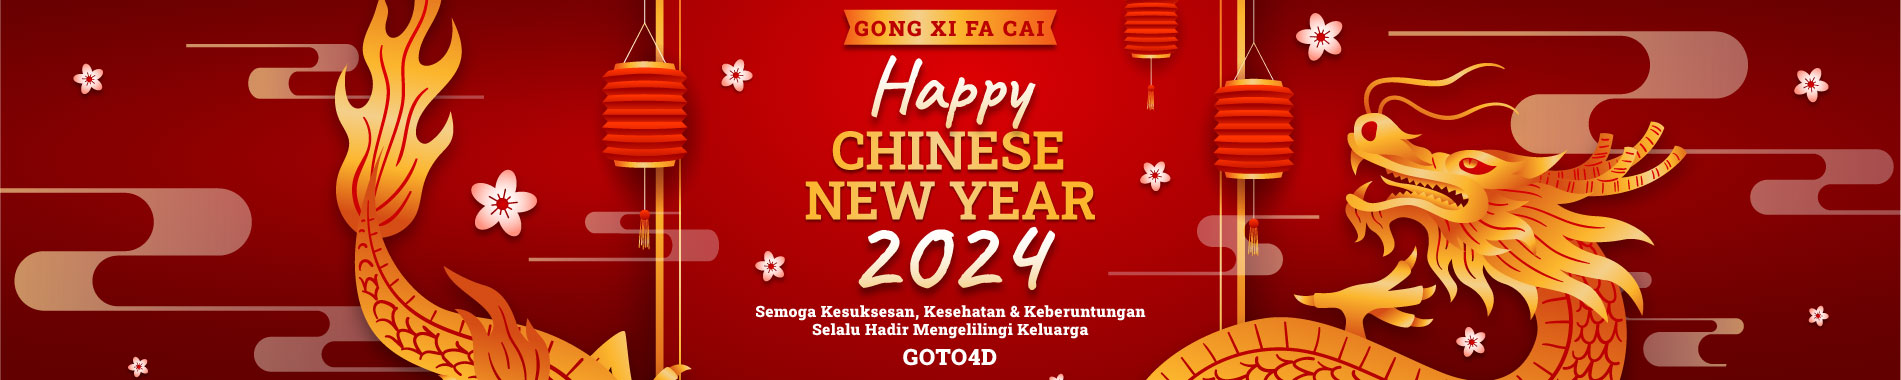 HAPPY CHINESE NEW YEAR 2024 gong xi fa cai